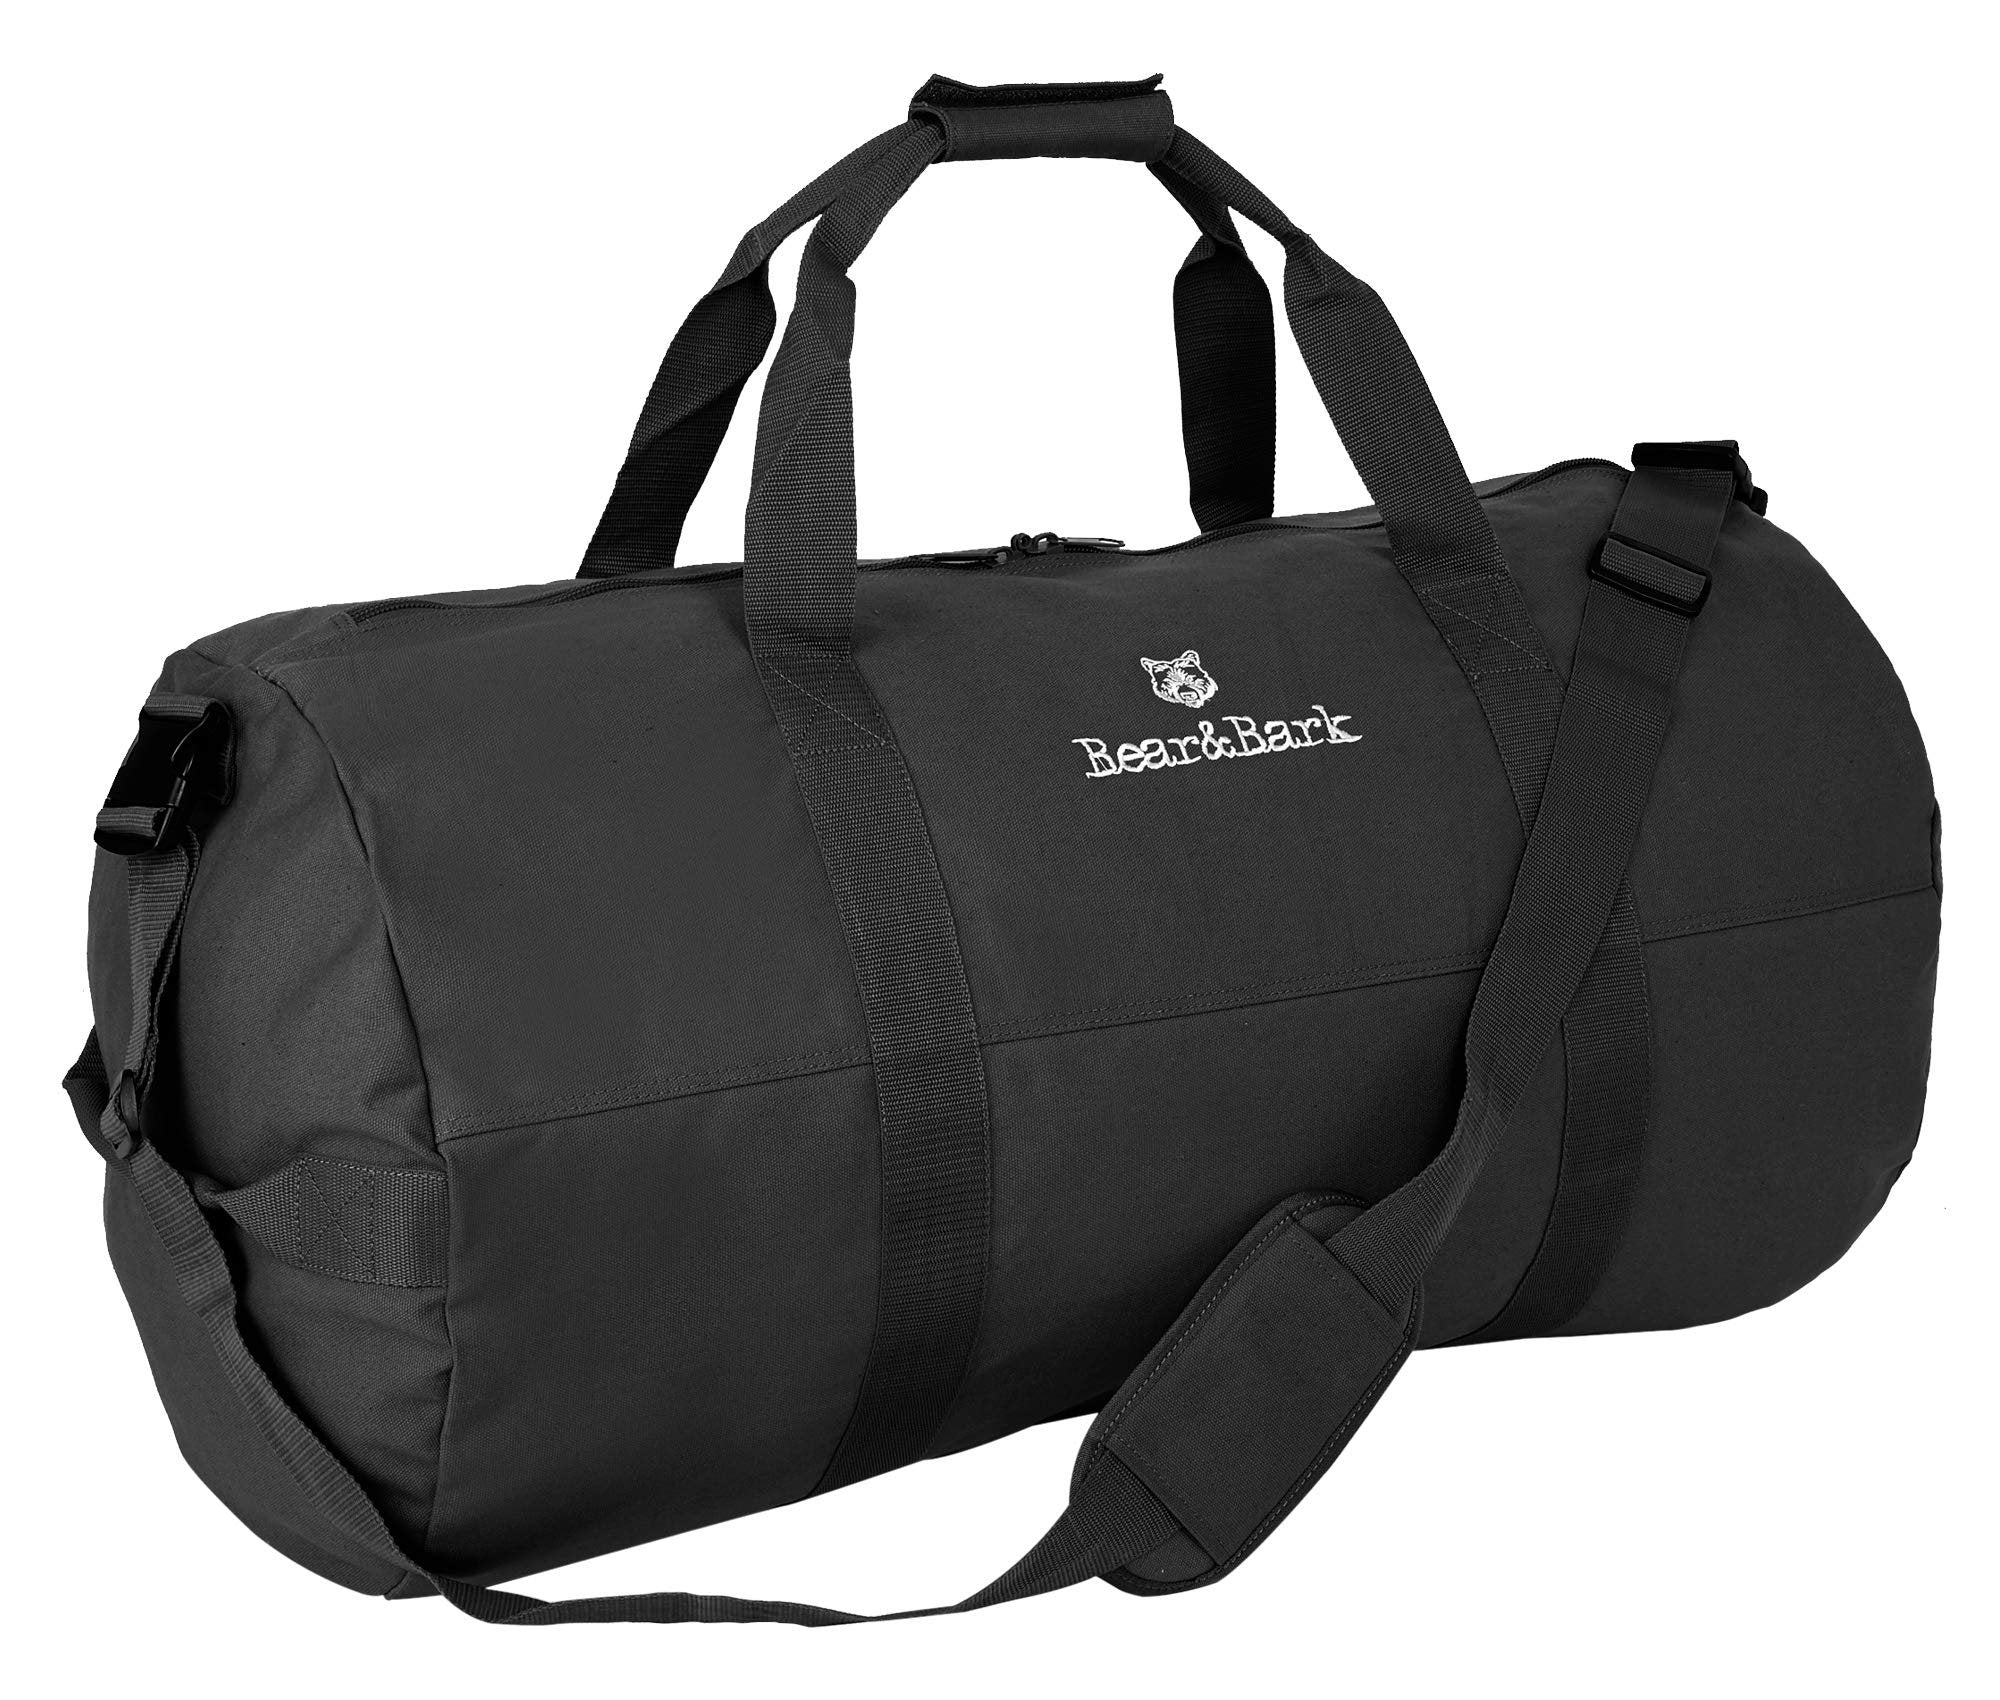 Extra Large Duffle Bag - Black 46"x20" - Canvas Military and Army Cargo Style Duffel Tote for Men and Women- College Student, Backpacking, X-Large Travel and Storage Shoulder Bag